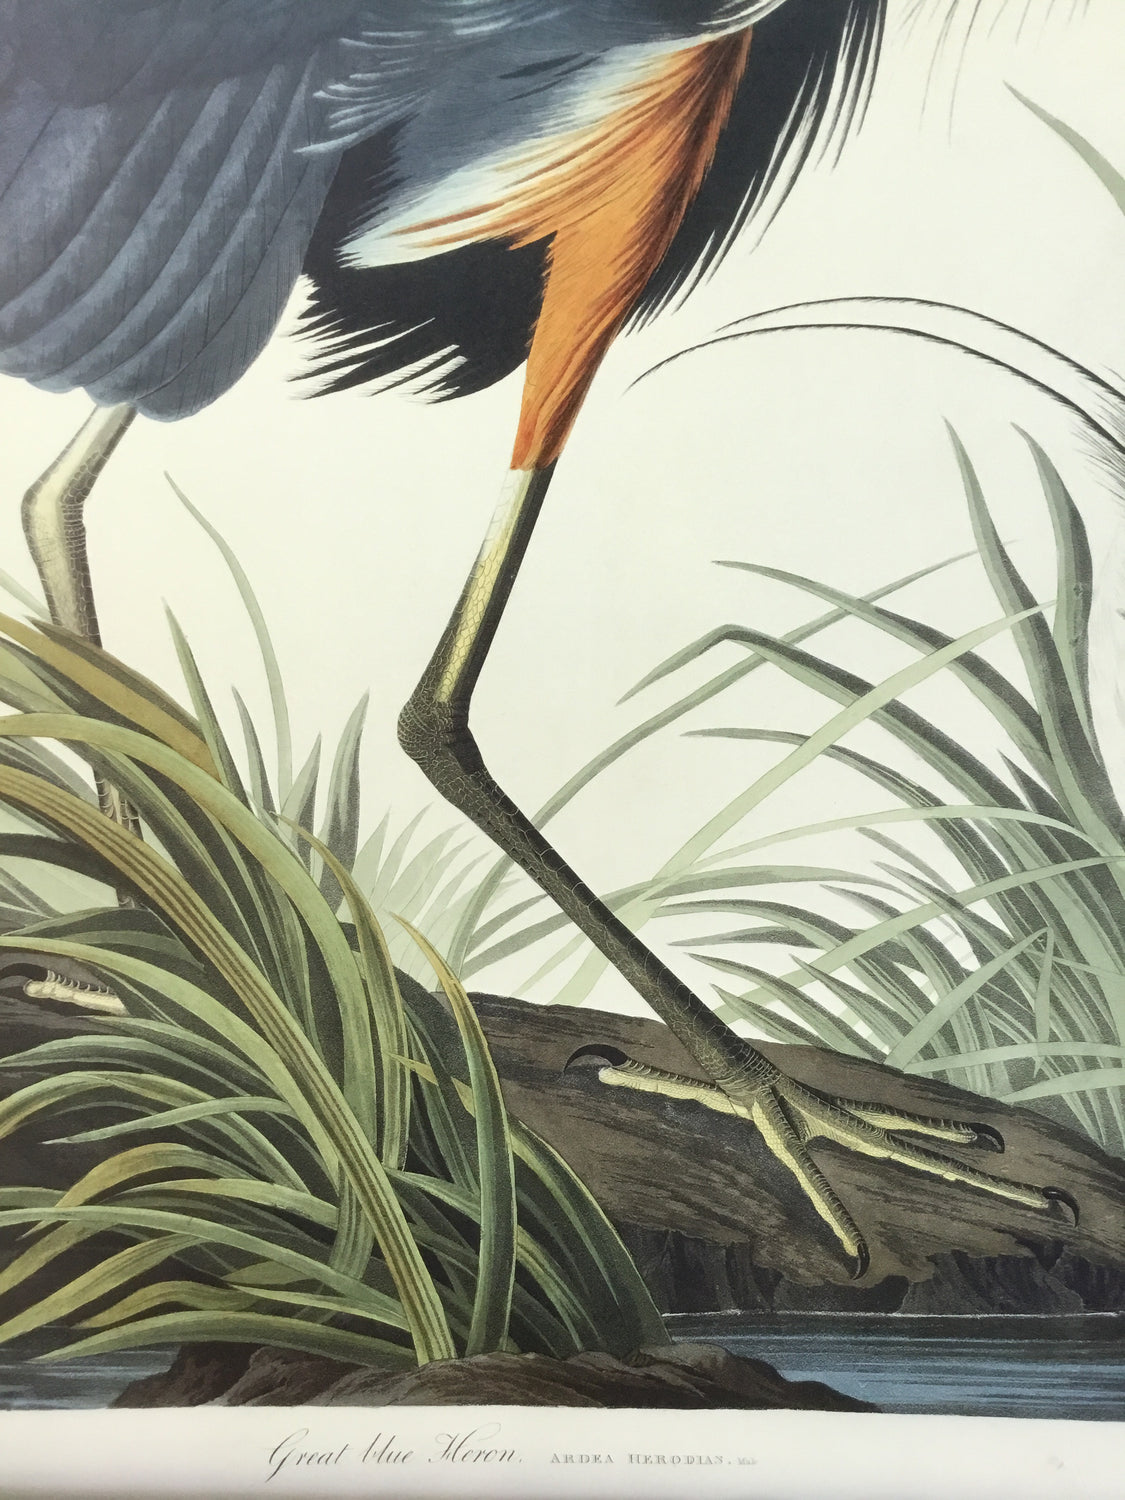 Great Blue Heron, 17 1/2 x 26 inches